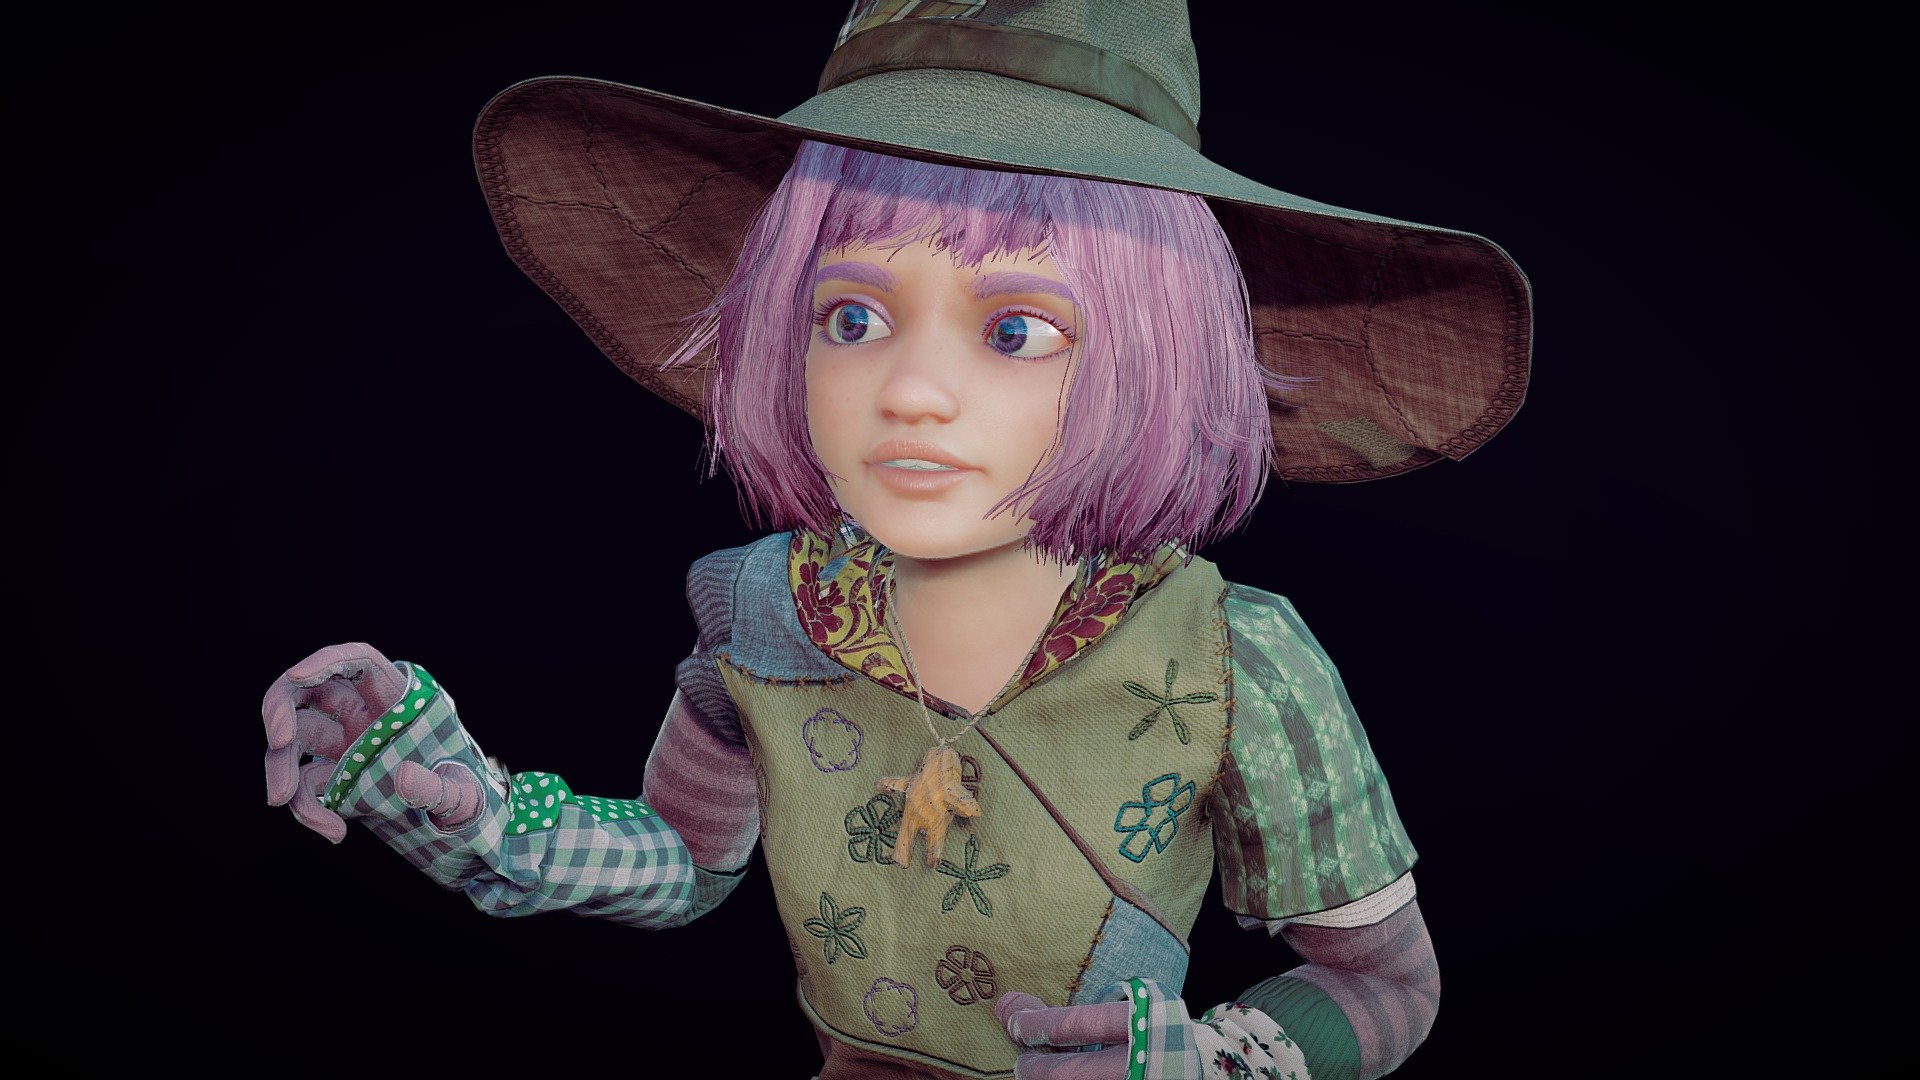 This real-time 3D model represents a charming and mysterious little witch girl. With purple hair, a pointed hat, and clothing with embroidered details, the little witch girl looks ready to cast a spell at any moment. Her facial expression is serious and focused, suggesting that she is a dedicated magic apprentice focused on her craft. The carefully crafted details add a touch of authenticity to her appearance. With its captivating design and ability to move in real-time, this 3D model is perfect for use in video games, animation, and virtual reality. Full-scale model in centimeters.

My Store
https://sketchfab.com/JoRCS/store

Includes sample file

Files included:





Textures PBR in 4k




Blender model (skinning and rigging)




FBX




OBJ









 - Witch girl realtime - cute girl - Buy Royalty Free 3D model by JoRCS 3d model